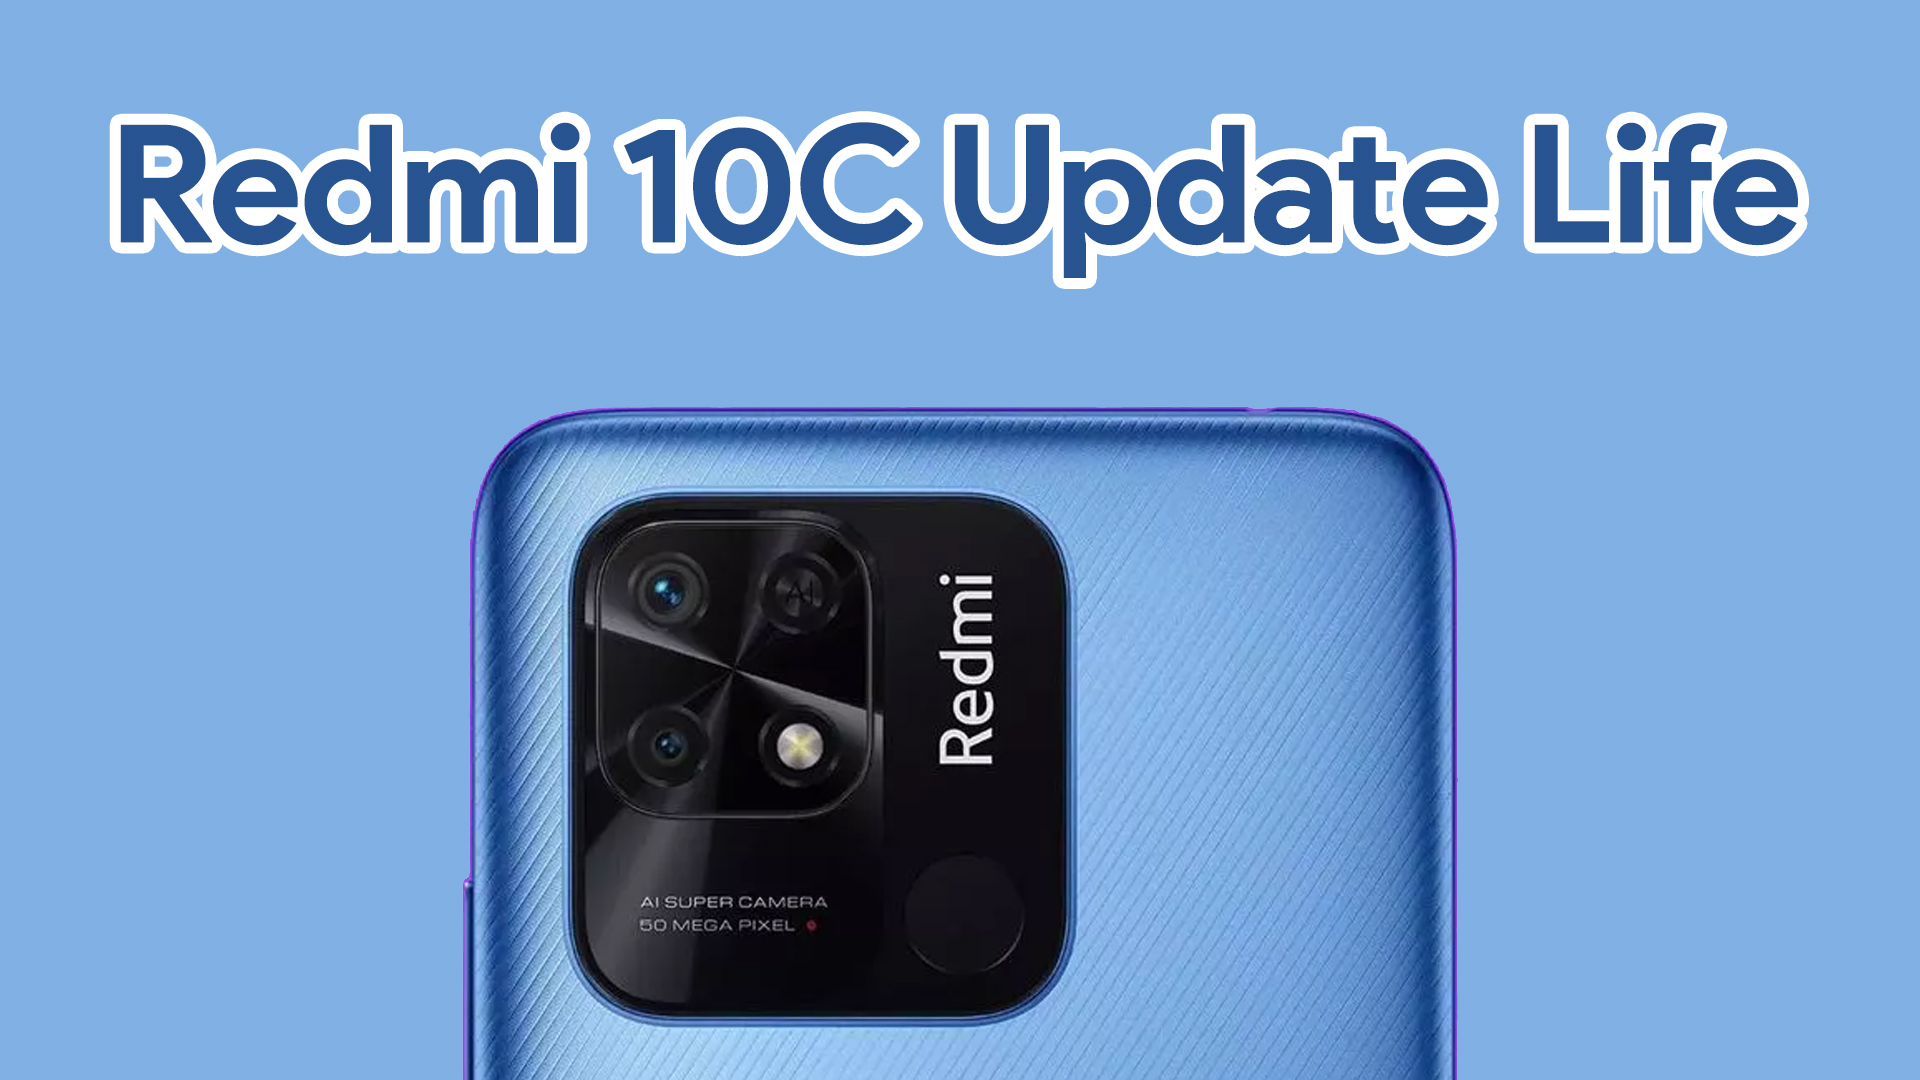 Redmi 10C Update Life and Plans